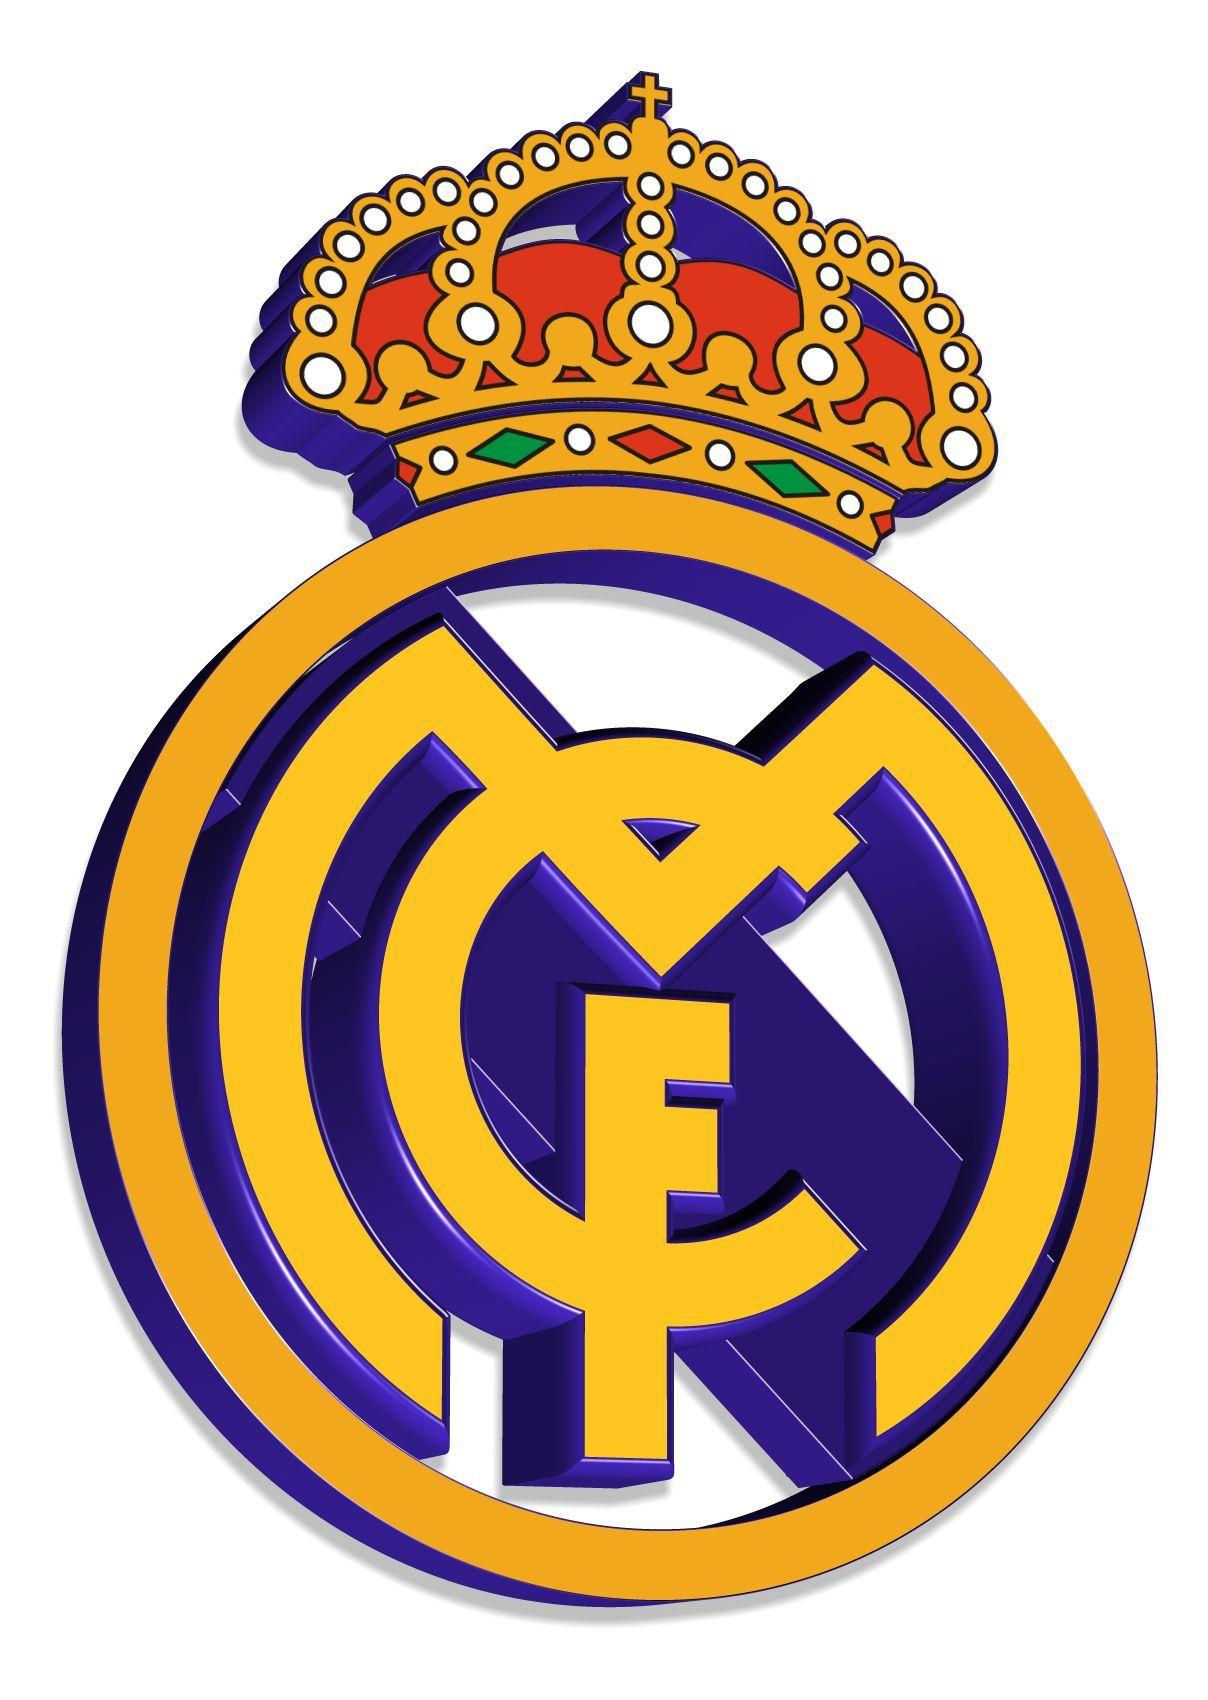 Real Madrid Wallpaper Image Photo Picture Background